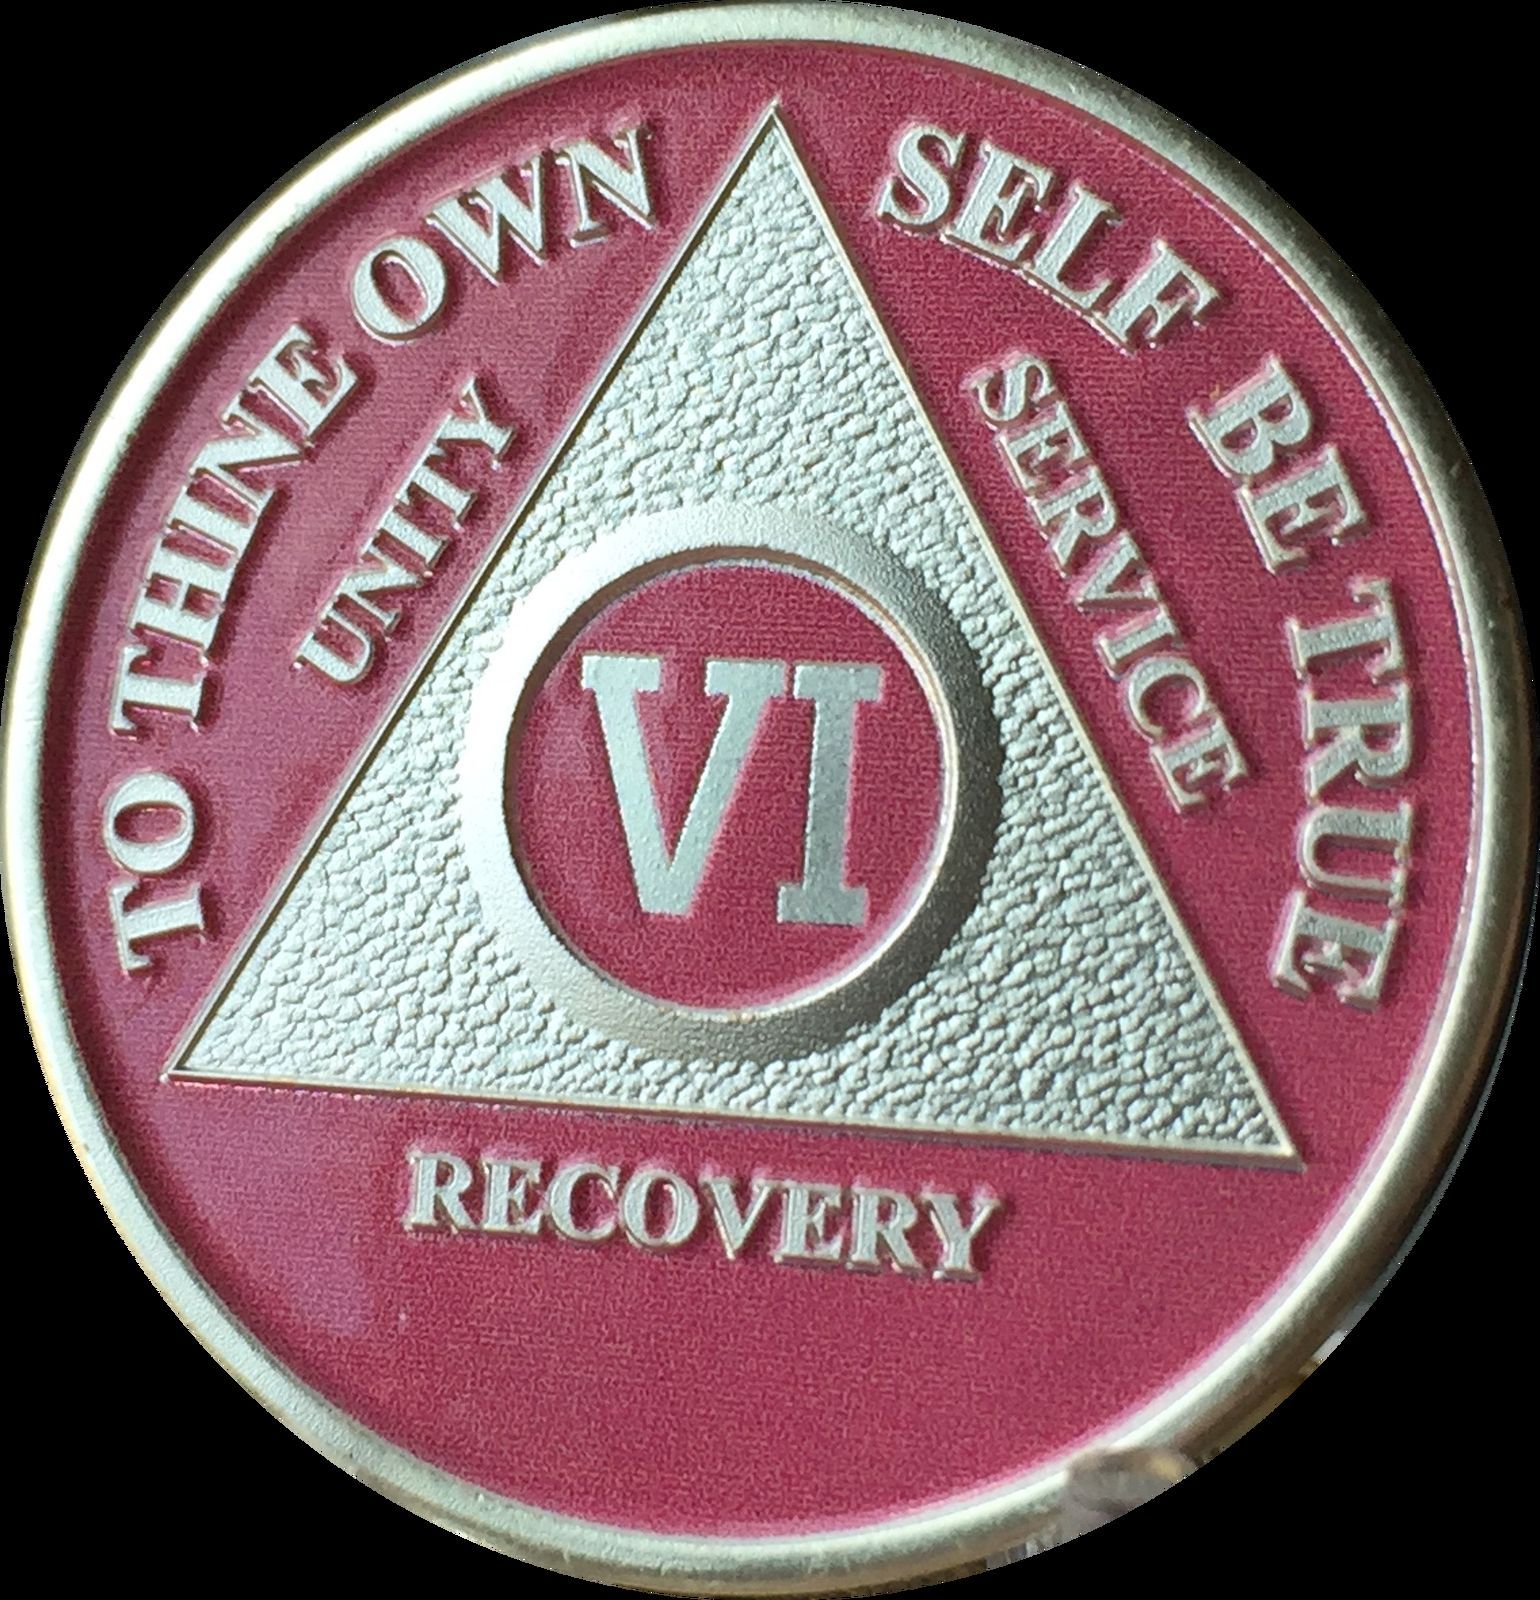 6 Year Pink Silver Plated AA Medallion Alcoholics Anonymous Sobriety Chip Coin